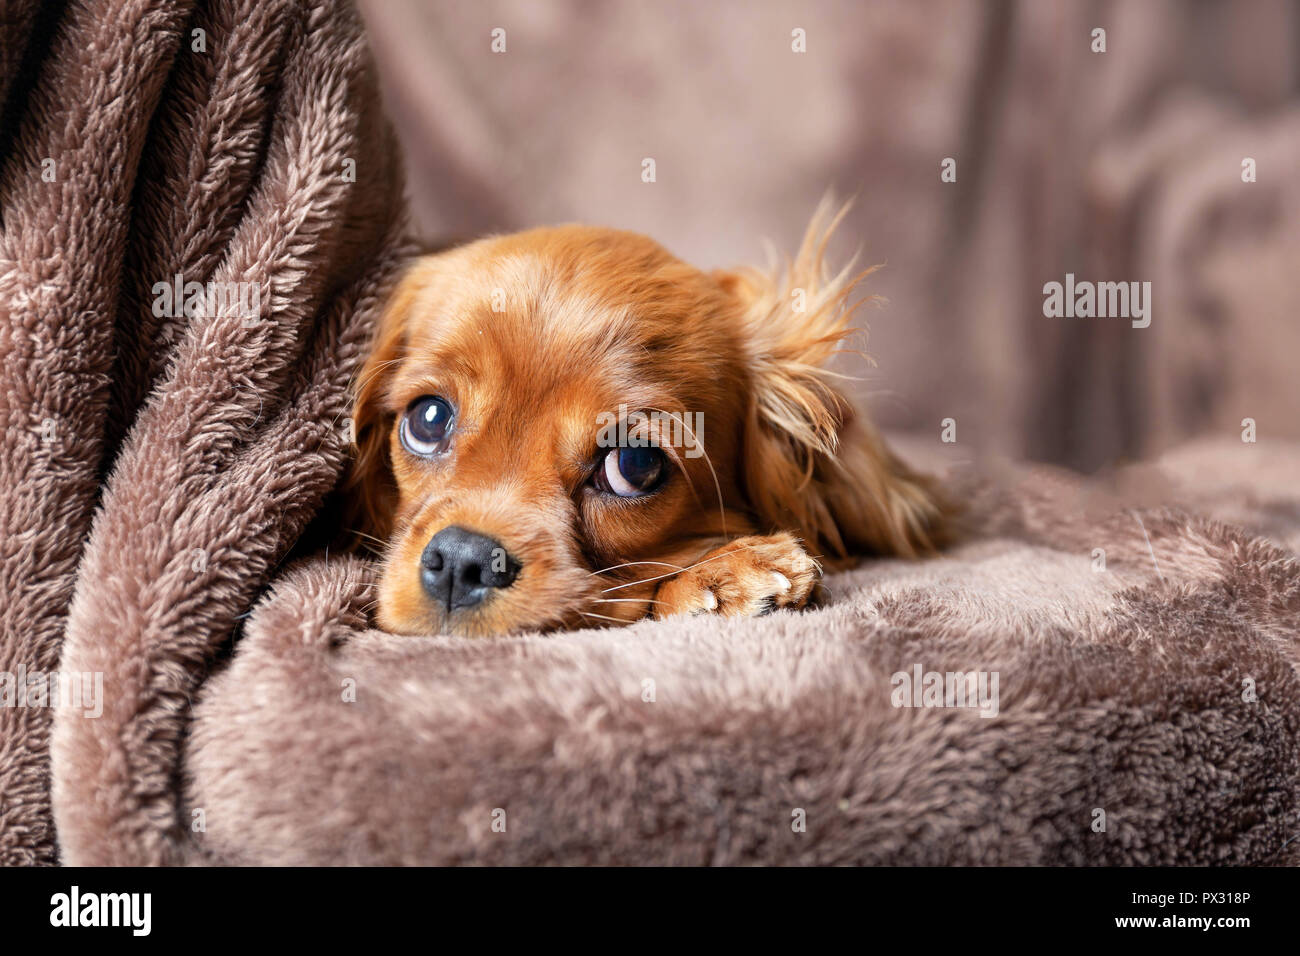 Cute puppy lying on the warm blanket Stock Photo